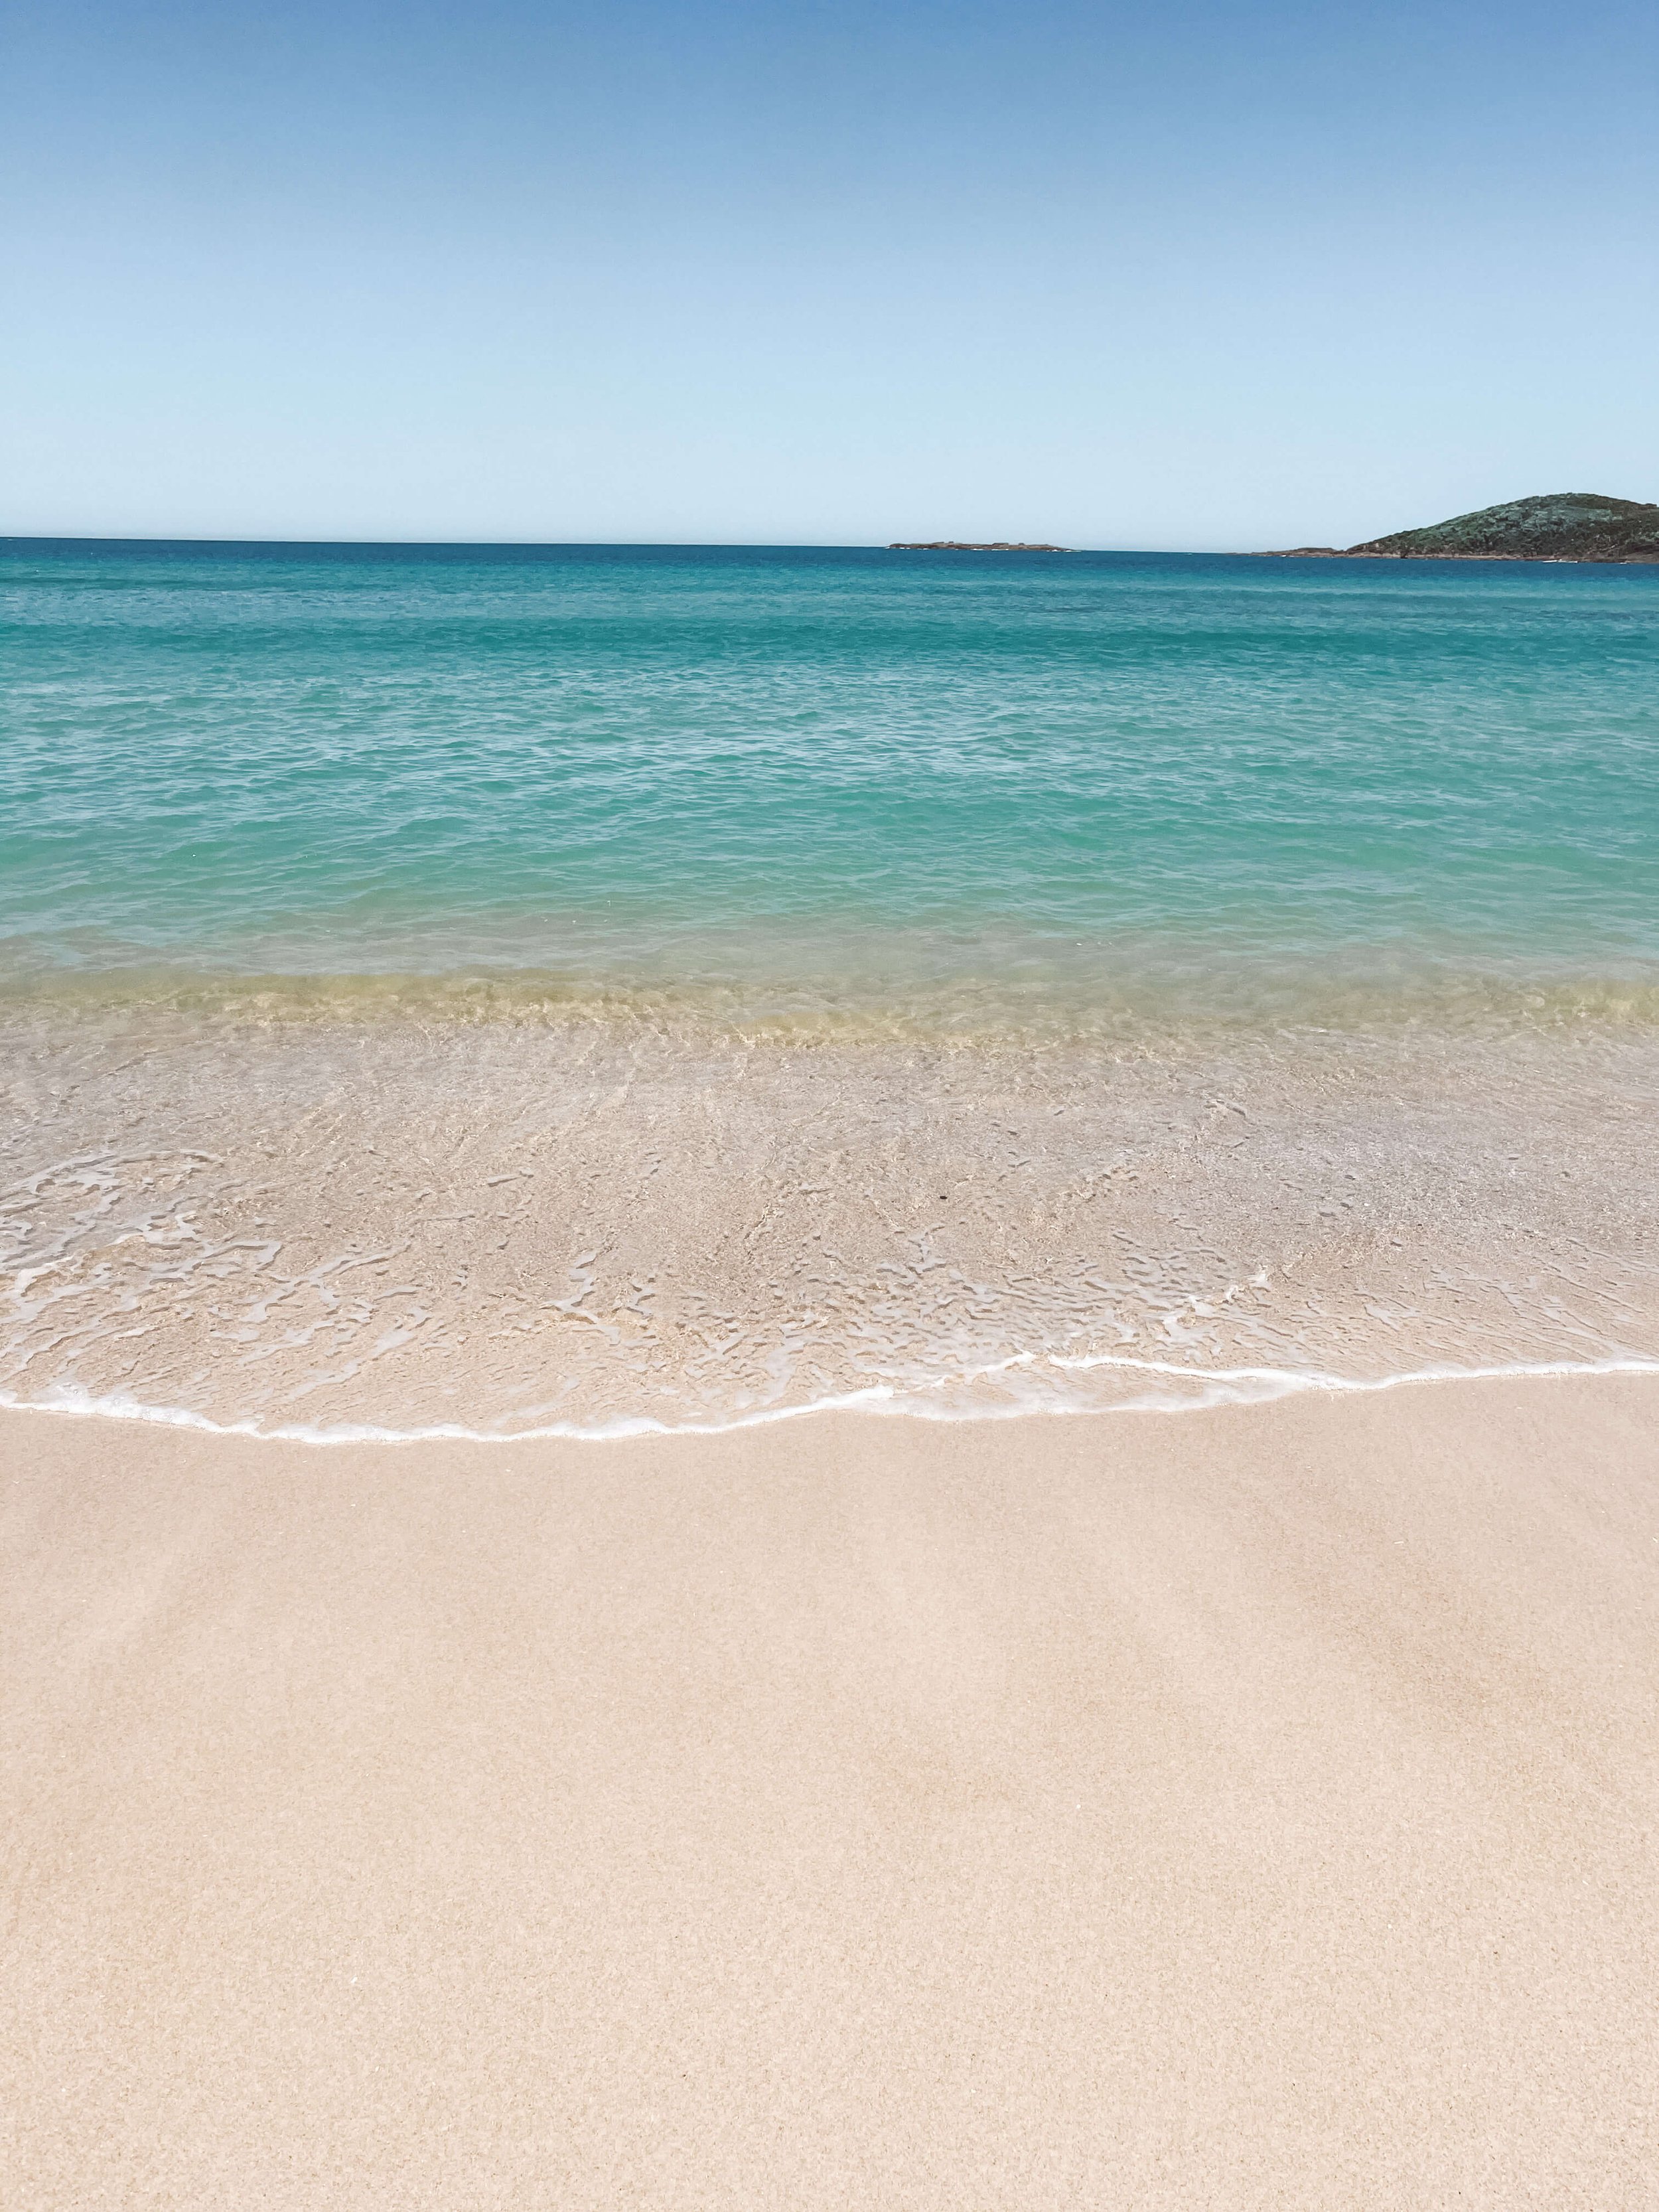 Turquoise water of Fingal Beach - Port Stephens - New South Wales (NSW) - Australia